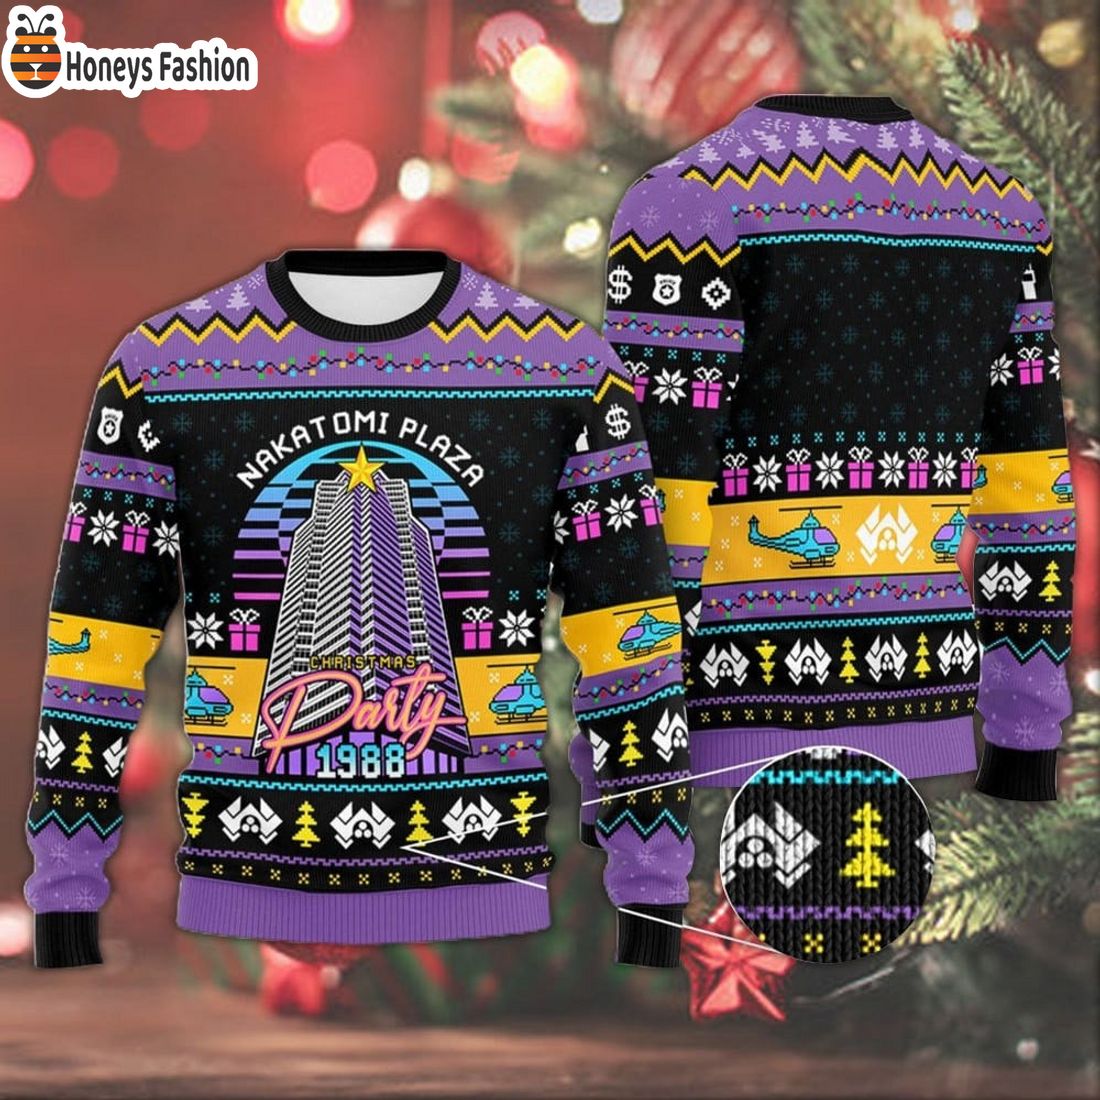 Die Hard Nakatomi Plaza Party 1988 Ugly Christmas Sweater